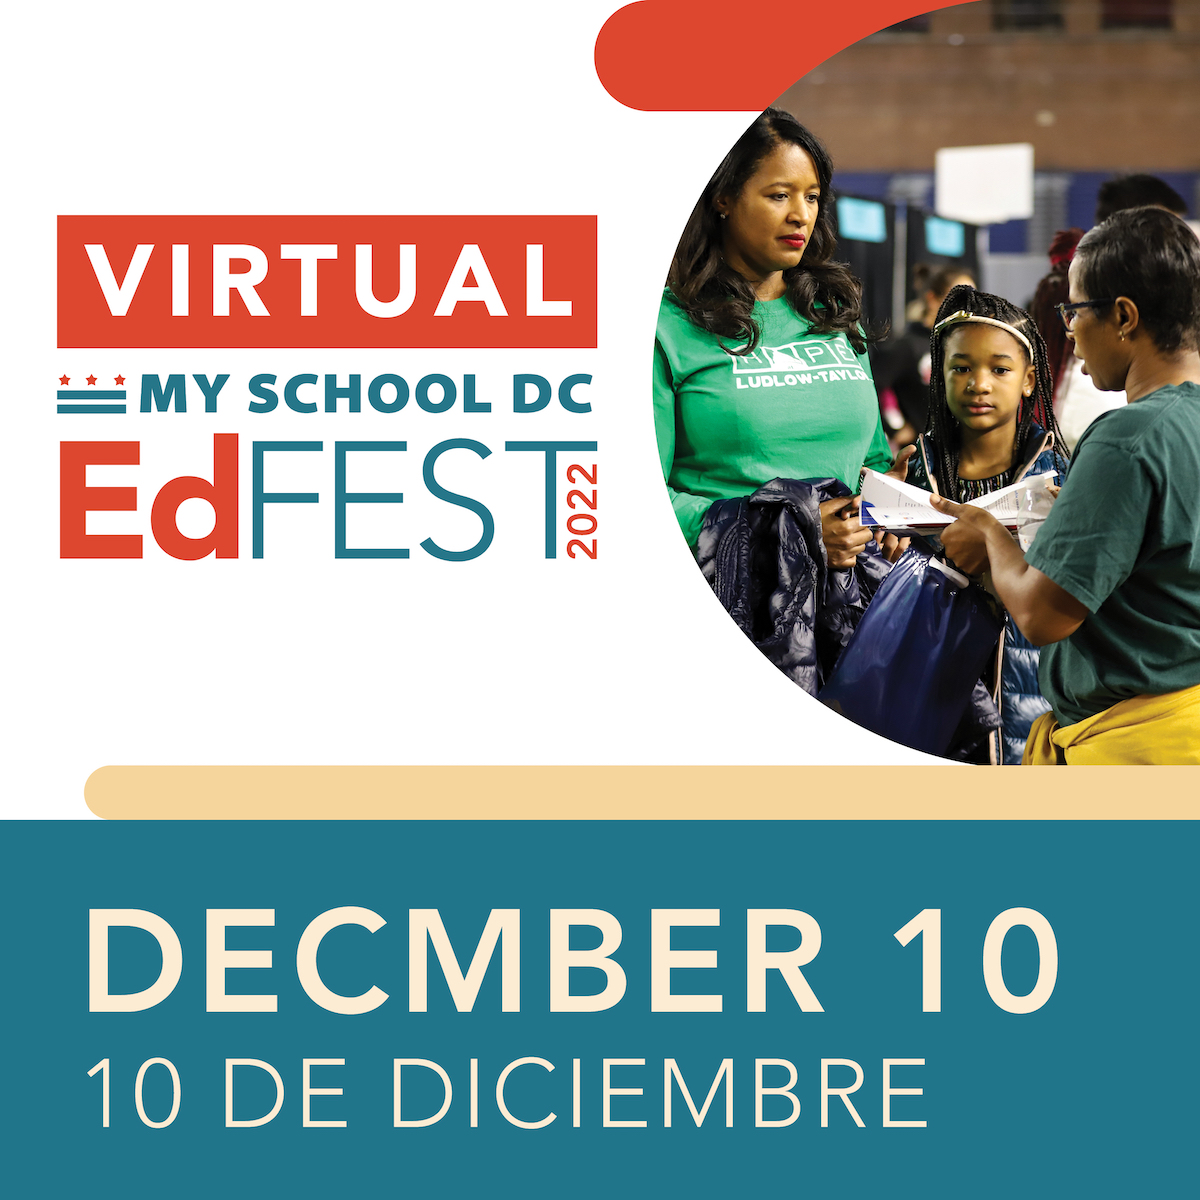 Whether you're looking for info about schools, the #MySchoolDC lottery application process, or anything in between, join us at Virtual #EdFEST22 next Saturday. Sign up at: bit.ly/virtualedfest